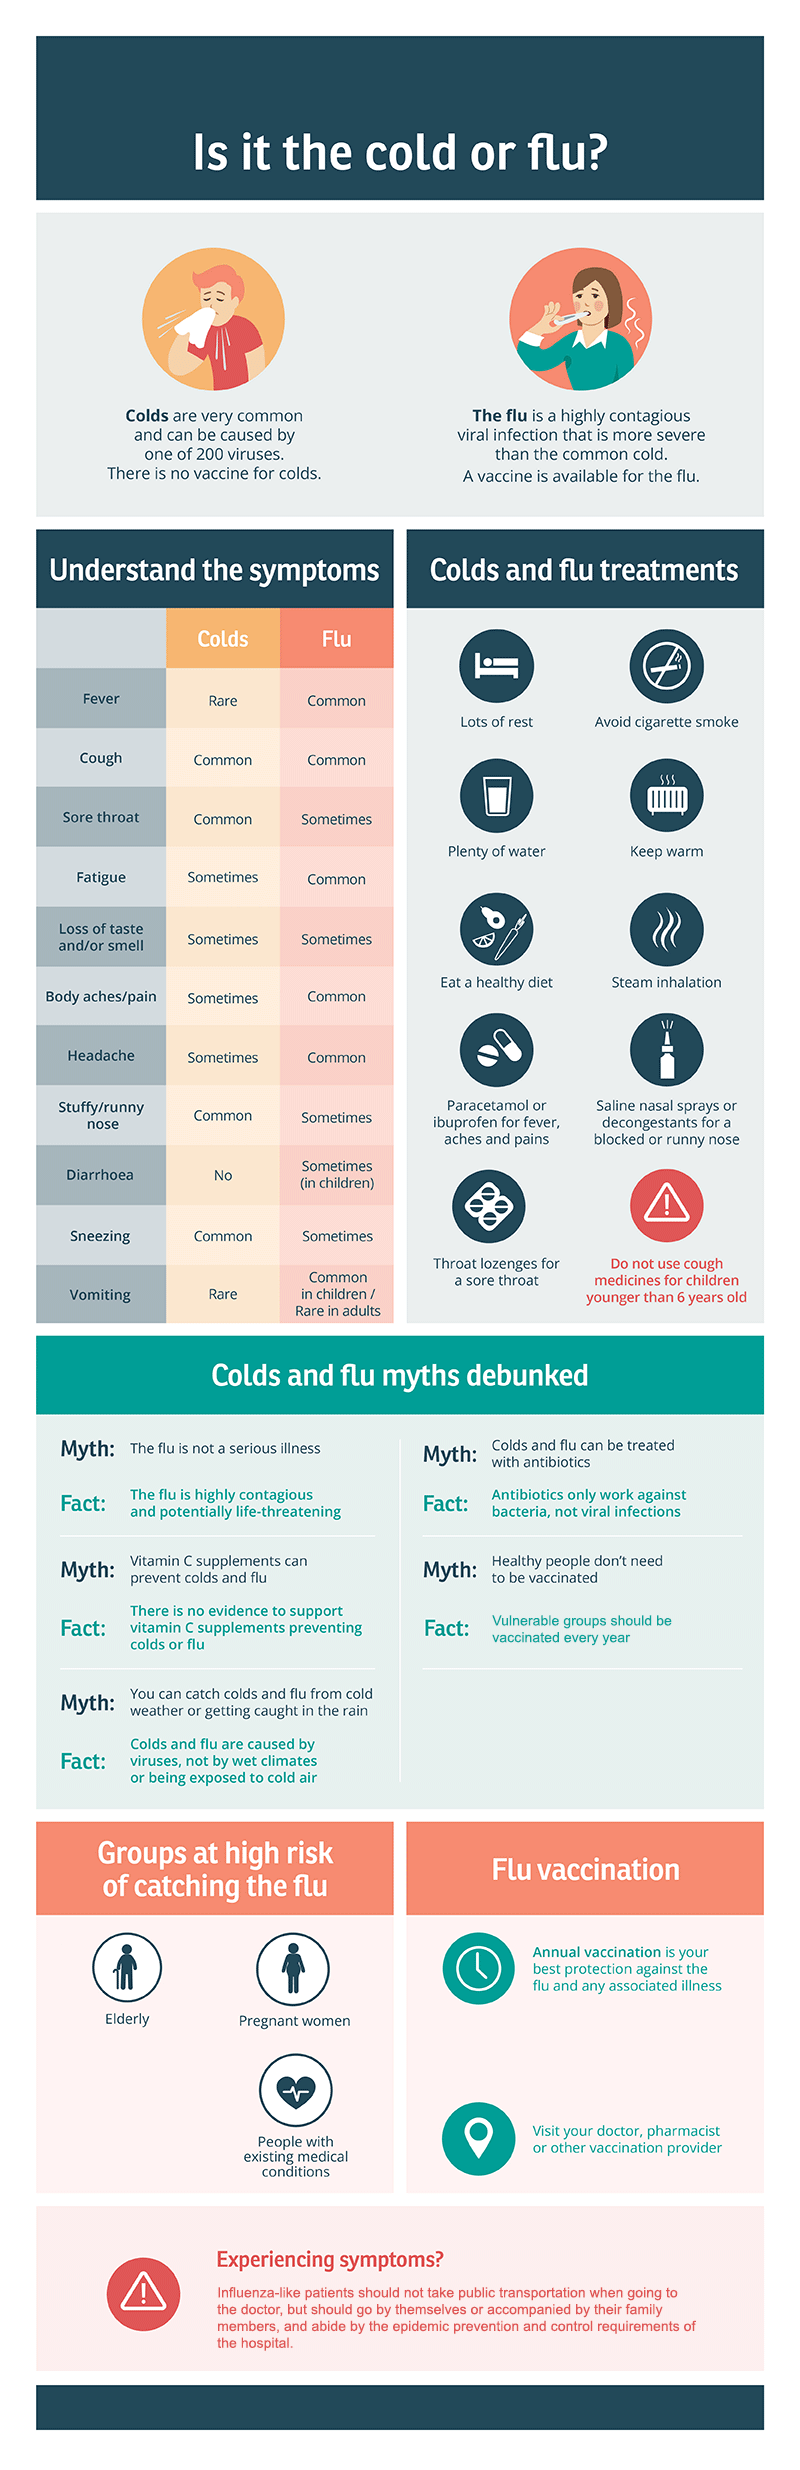 Cold-of-flu-infographic-for-site